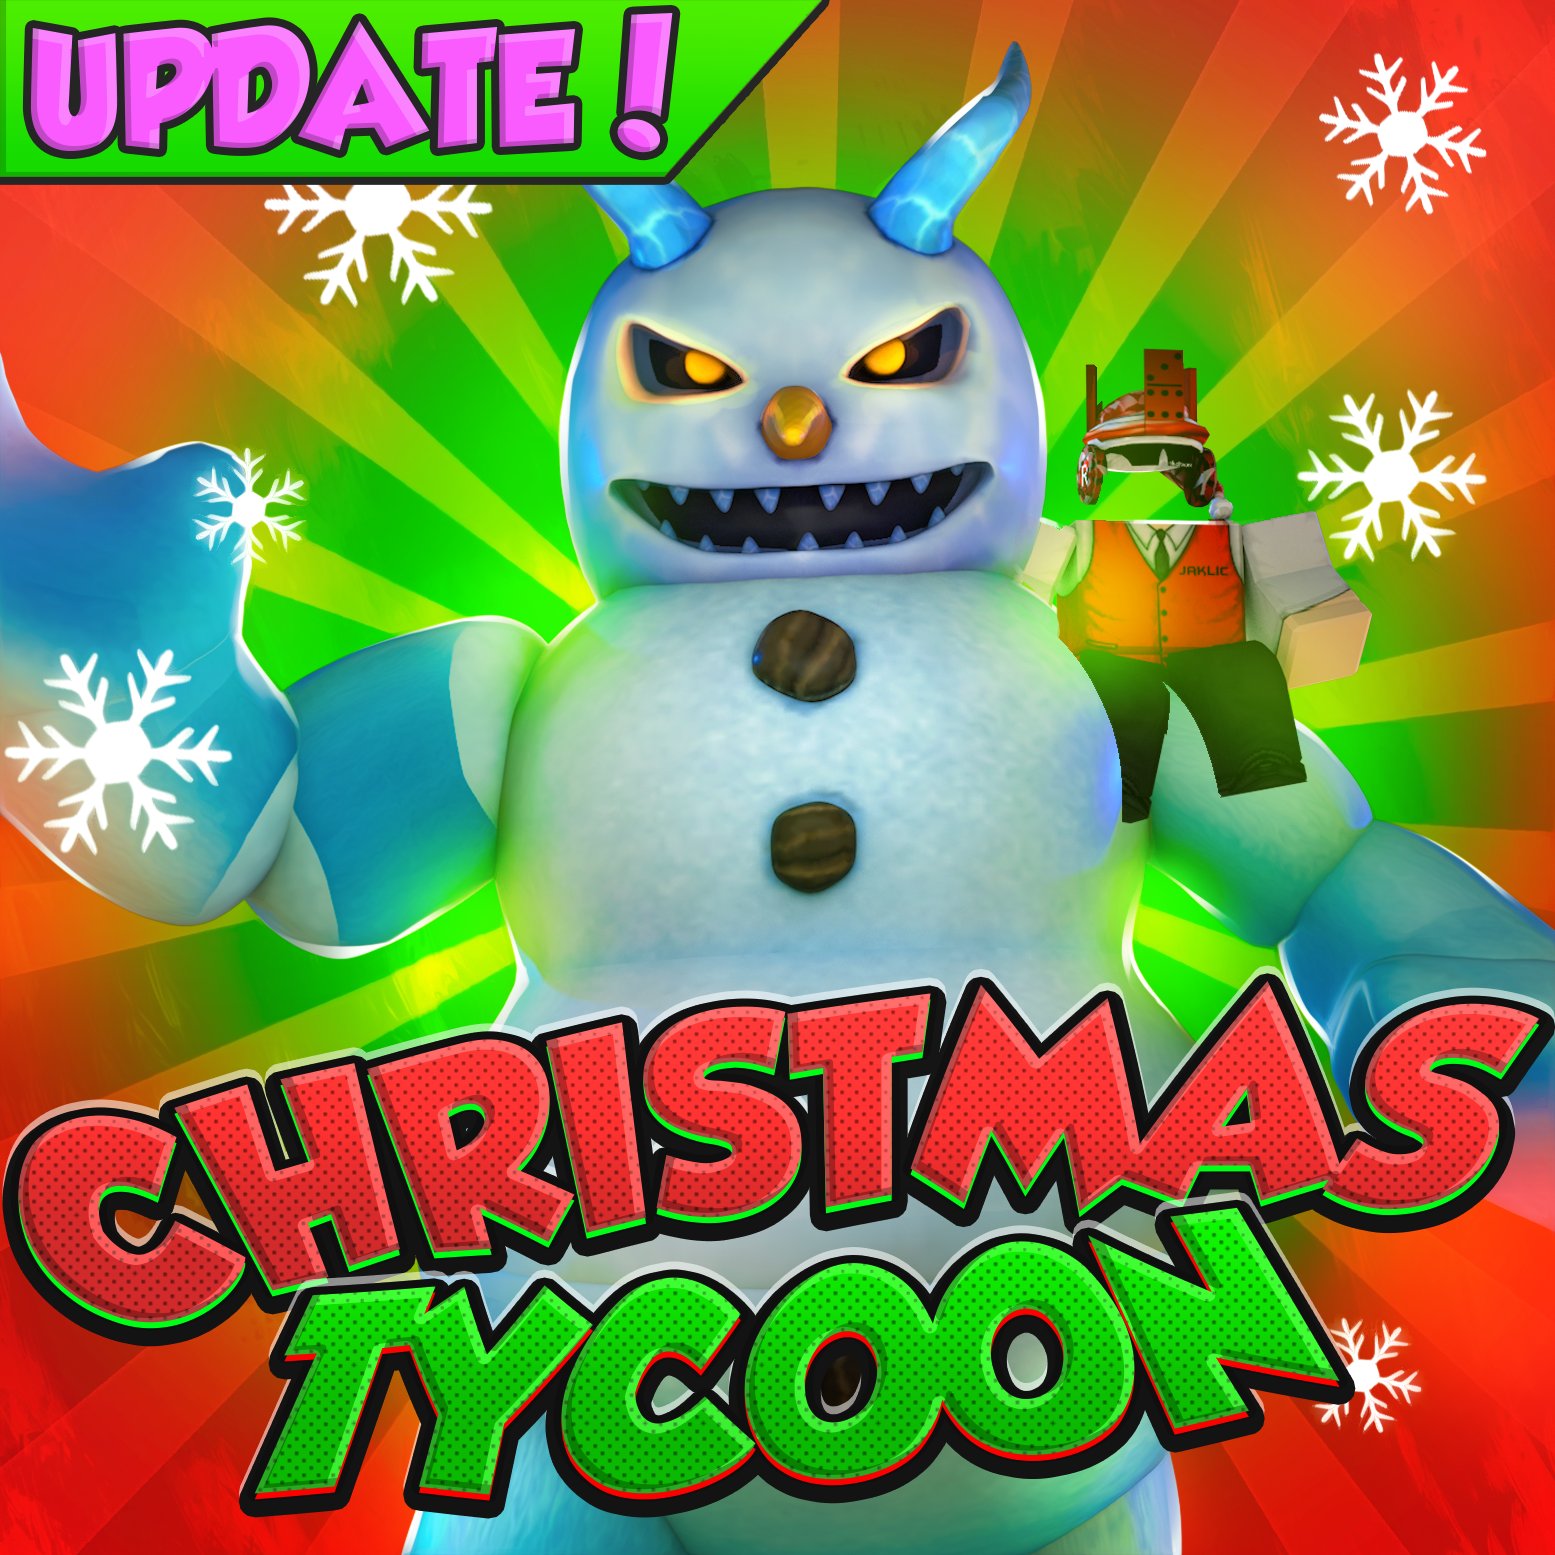 Jaklic On Twitter Christmas Tycoon Update Is Here Explore The North Pole And Save The Christmas Also Use A Brand New Code Evilupdate To Get Penguin Package Giver And A Snowy Aura - roblox christmas tycoon twitter code